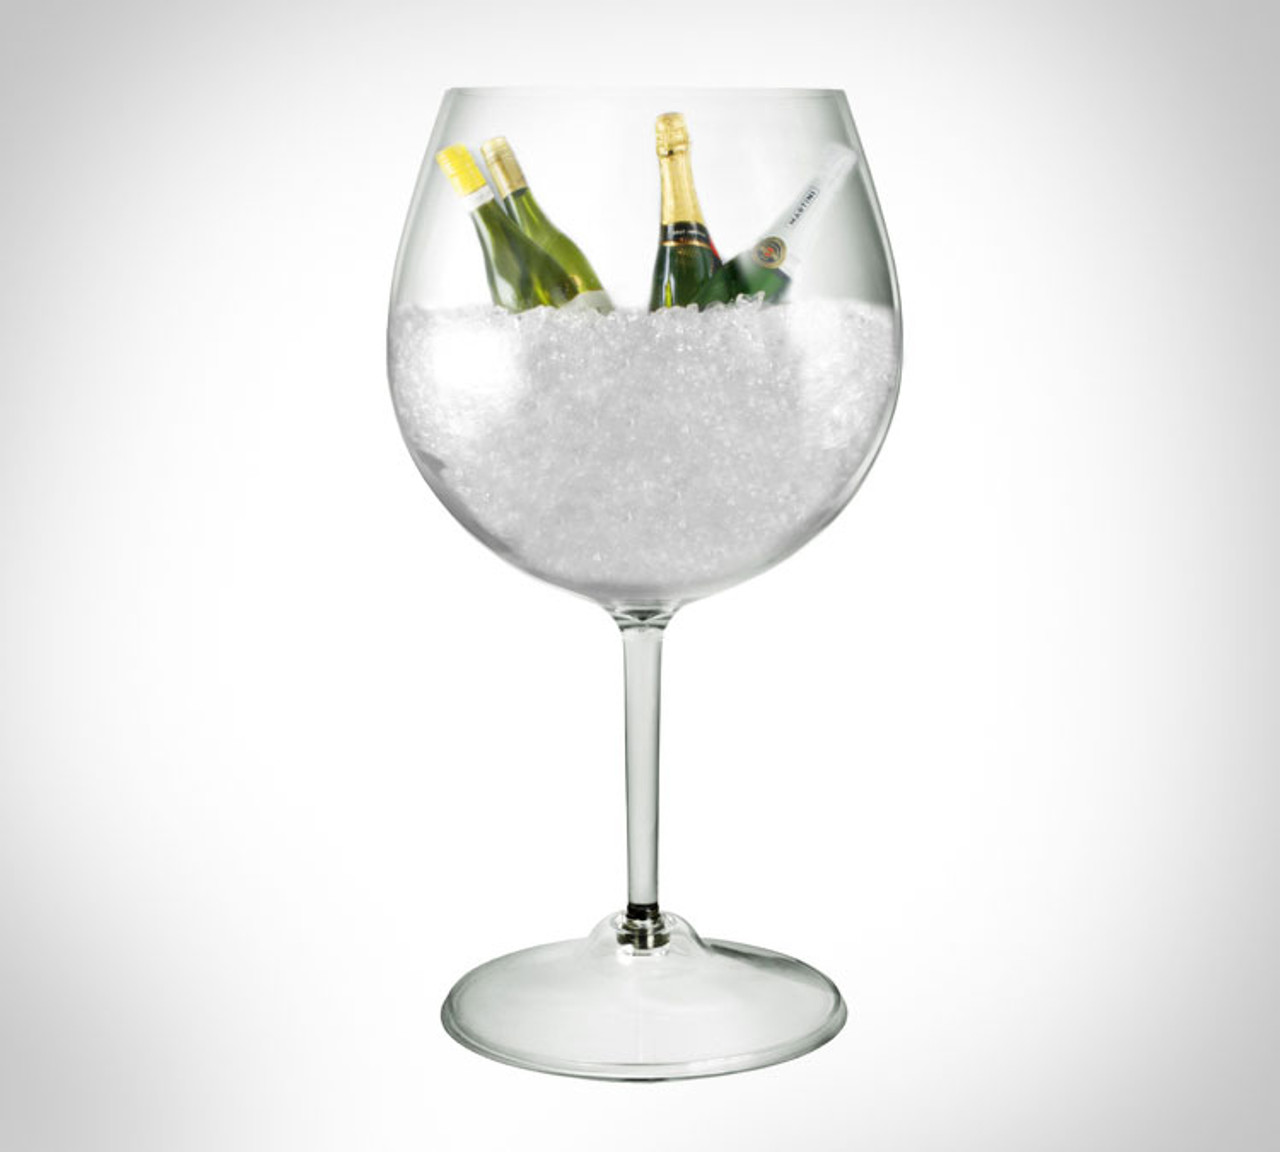 https://cdn11.bigcommerce.com/s-a7mqe/images/stencil/1280x1280/products/1154/3327/wine_glasses-giant-wine-glass-ice-bucket-521__65071.1496770761.jpg?c=2